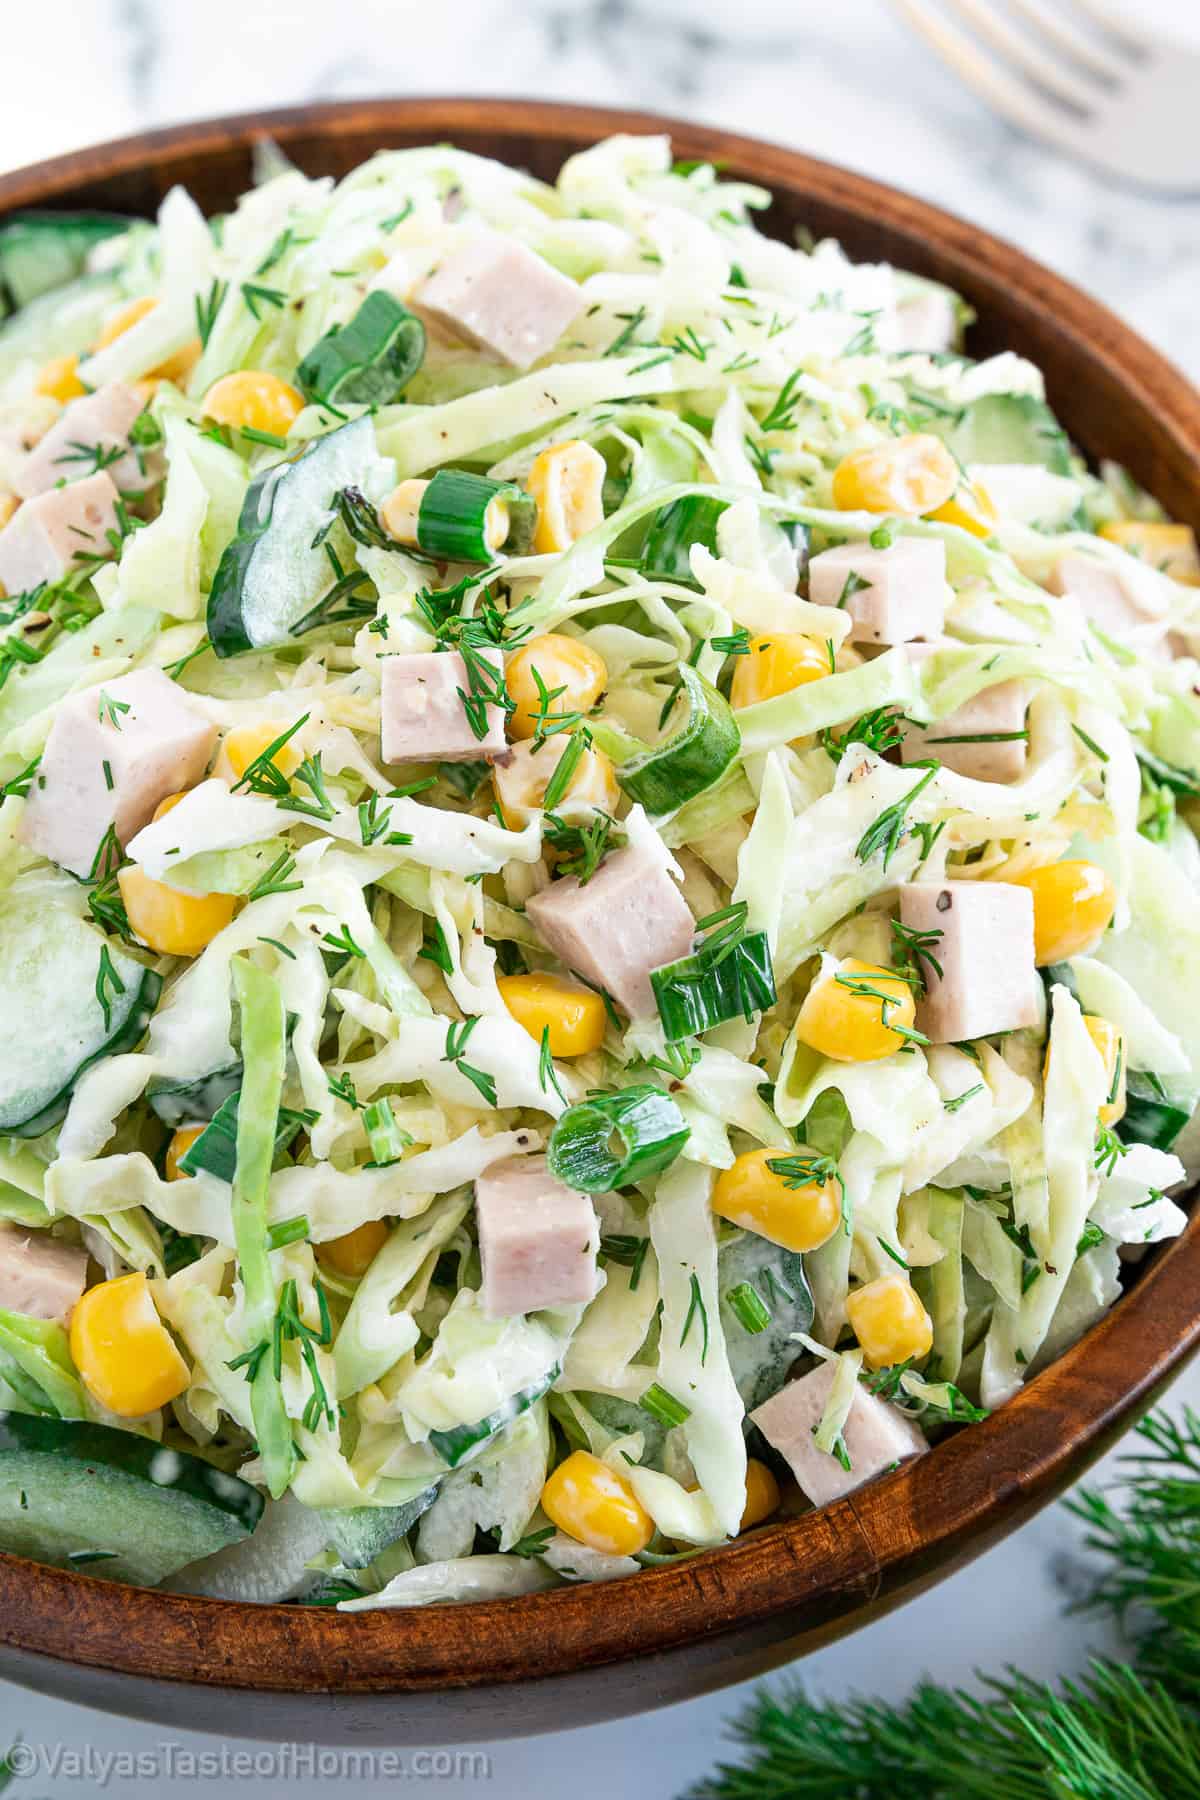 Salads are best served fresh, so when possible make them and serve them right away to truly enjoy the delicious flavors of all the veggies combined with the delicious mayo-based salad dressing. 